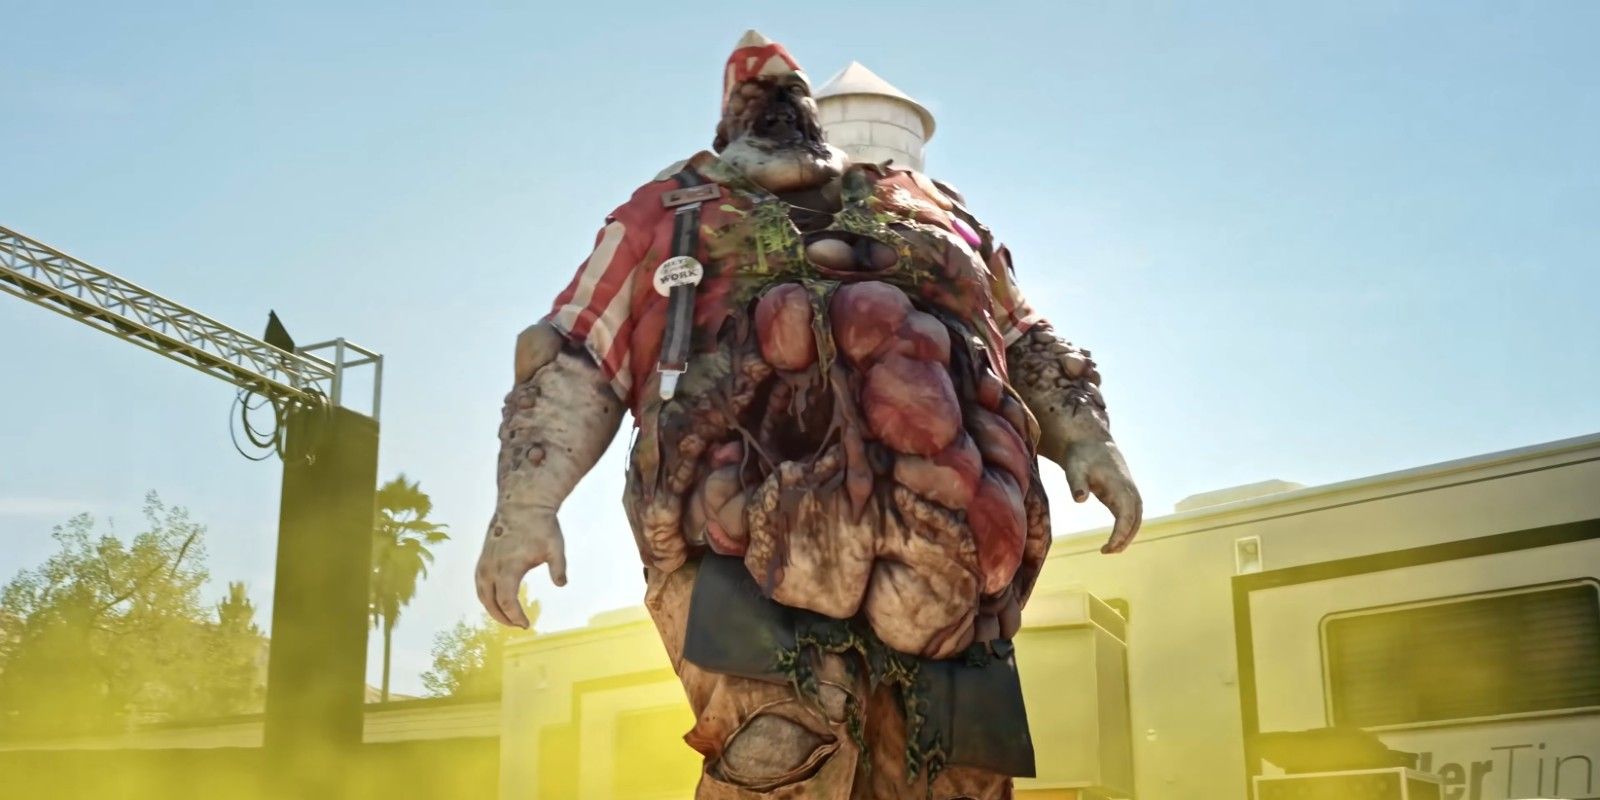 Dead Island 2: an overweight zombie with a fog of green around him, suggesting he is toxic.